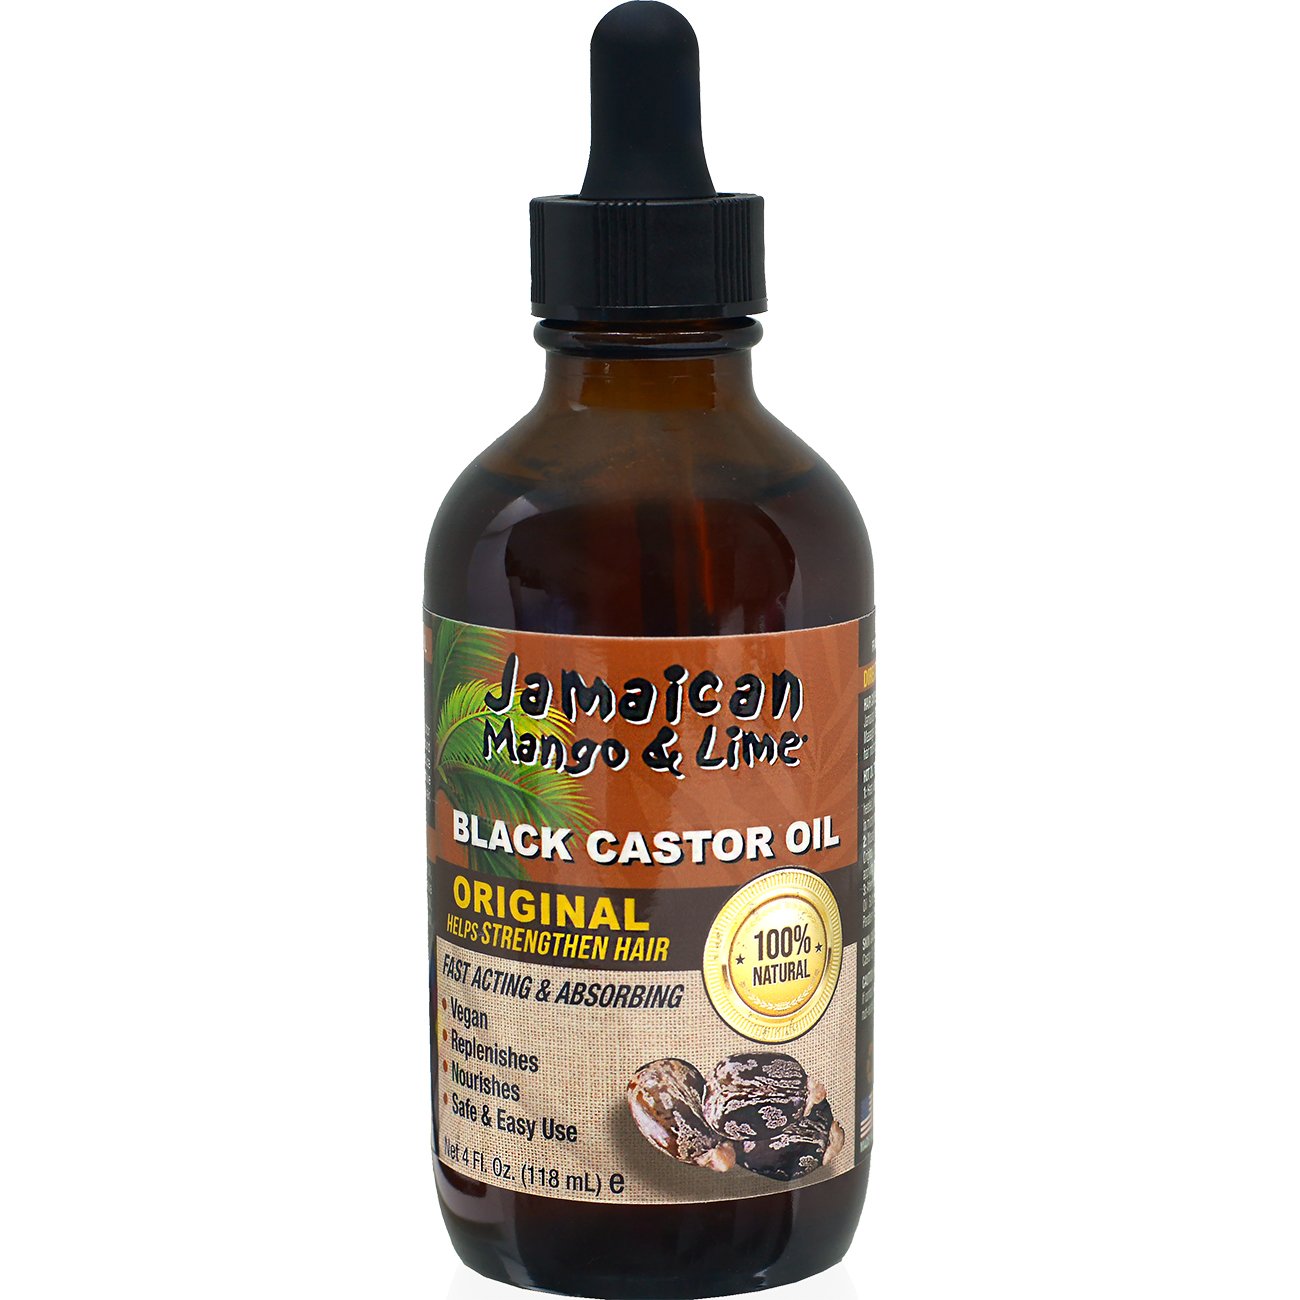 Jamaican Mango Lime Black Castor Oil Original Shop Styling Products Treatments At H E B